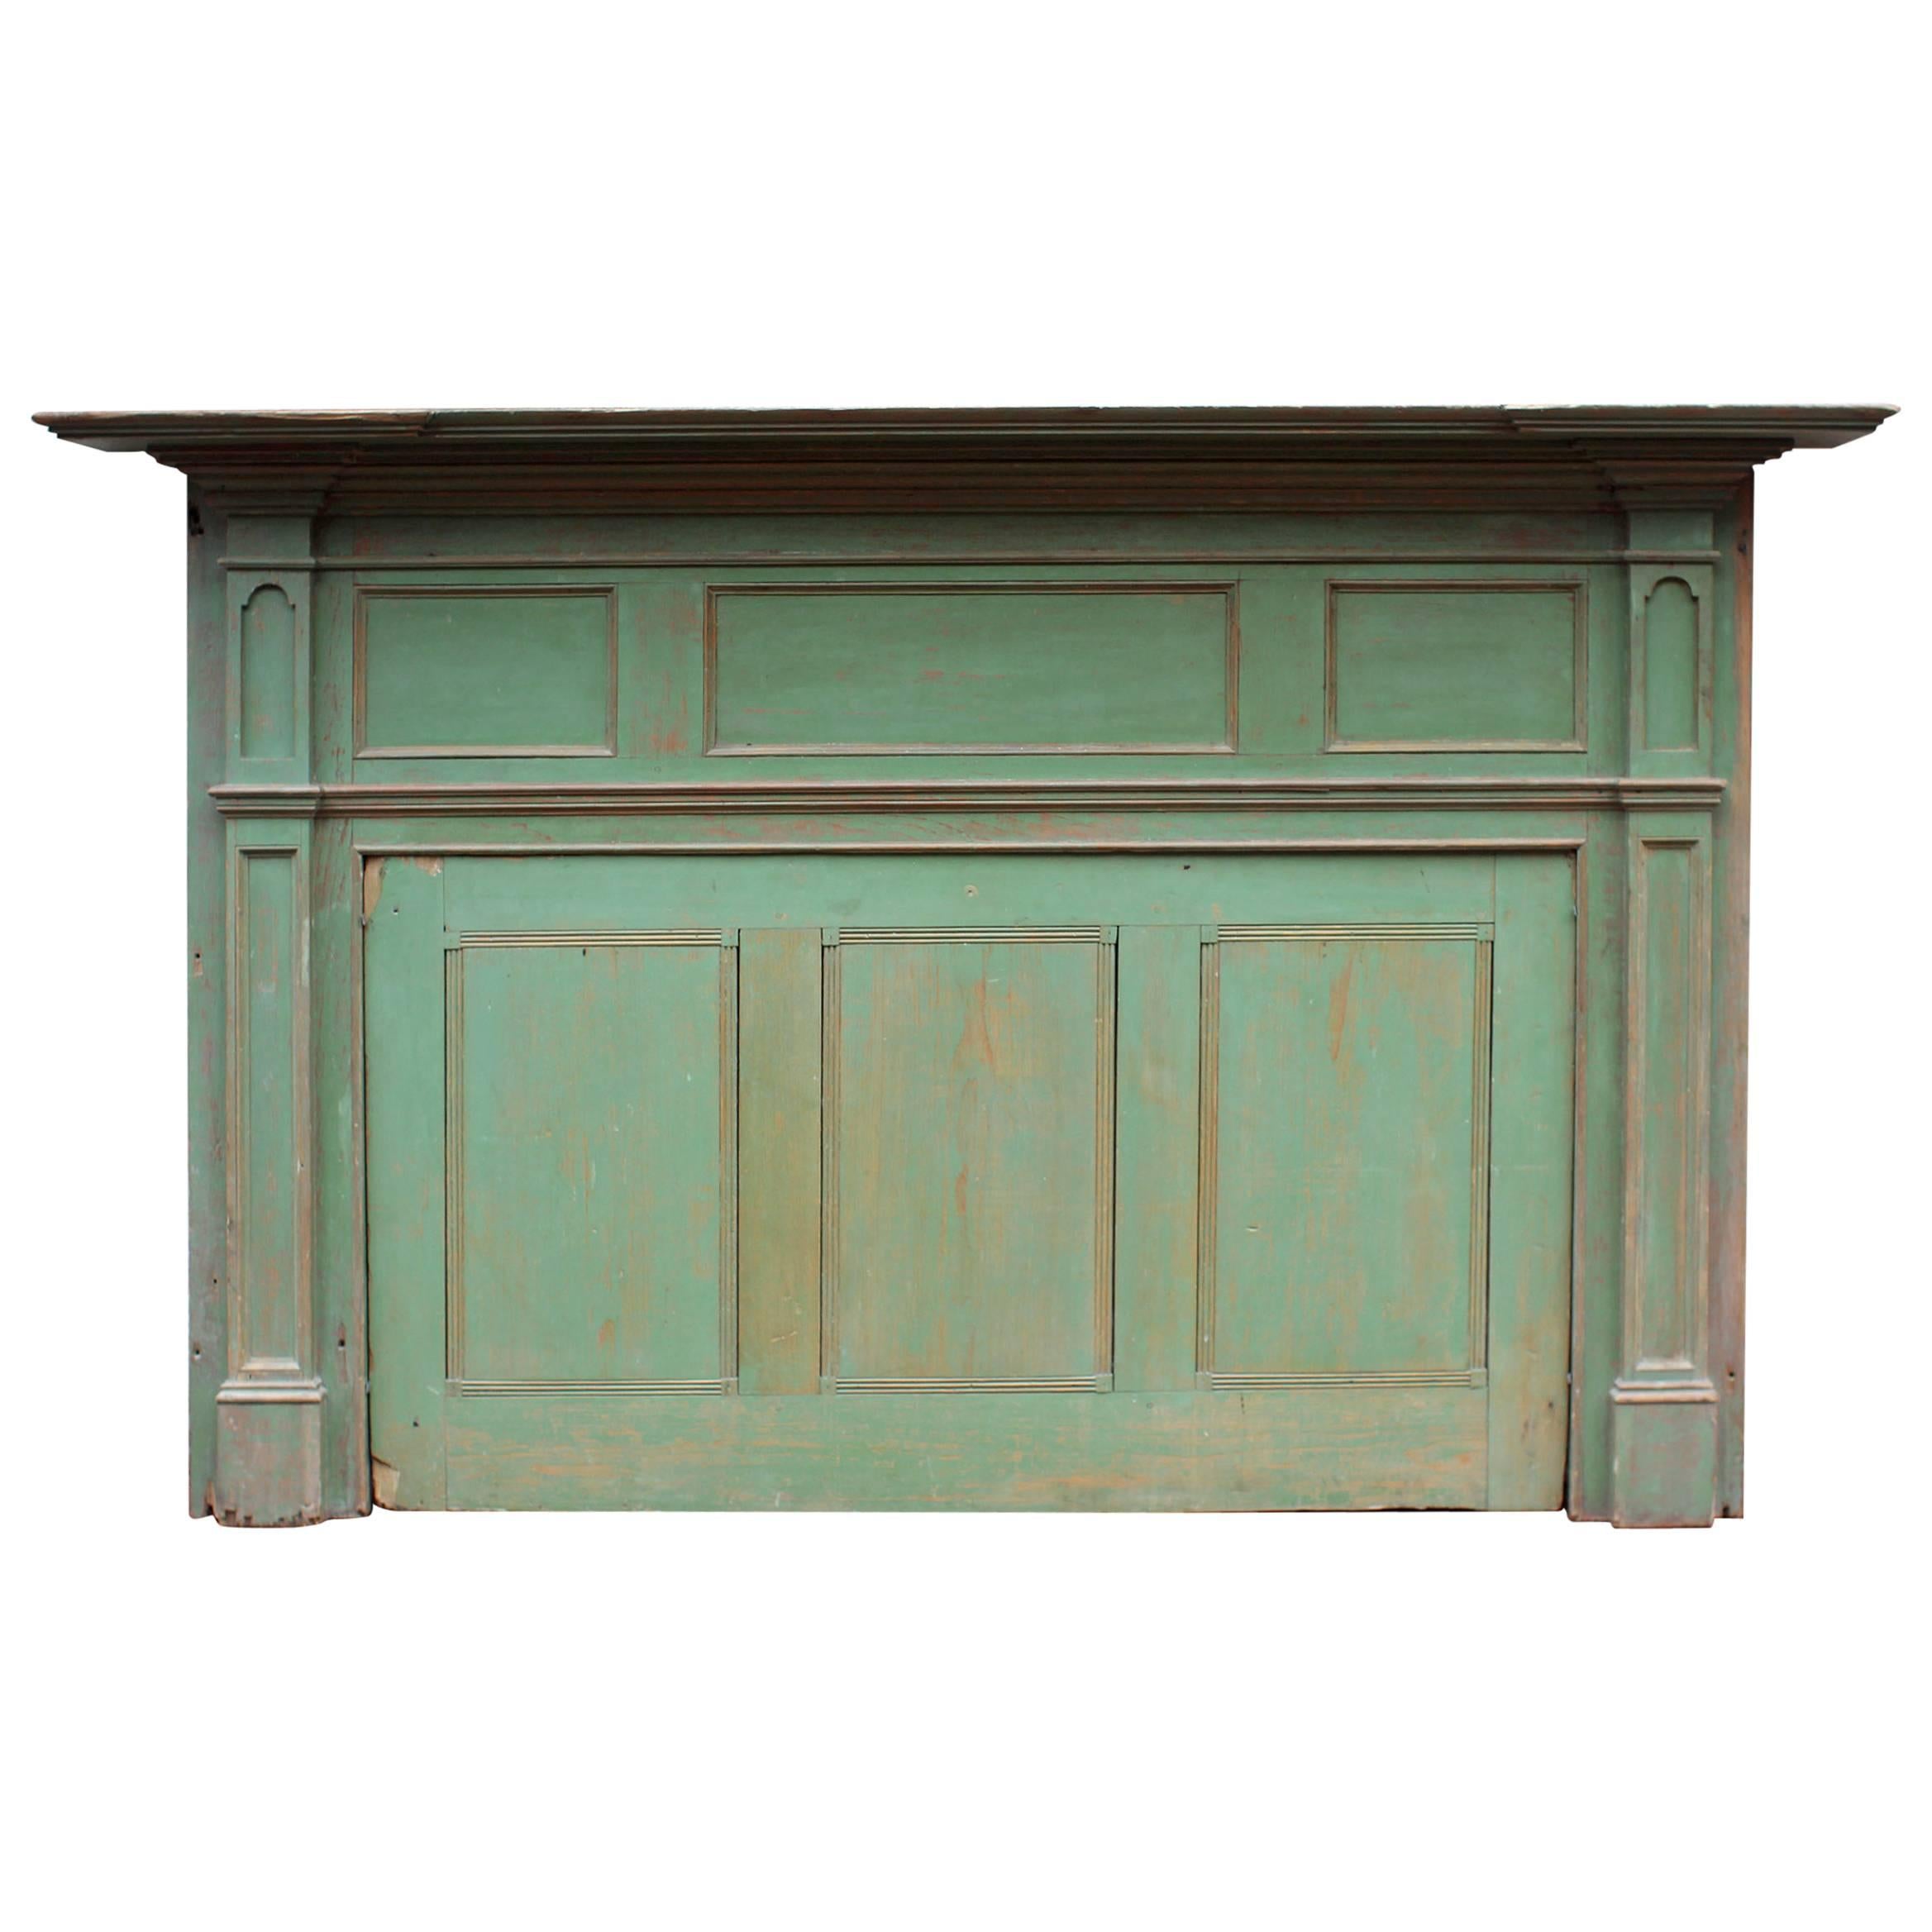 Early 19th Century New England Painted Mantel and Summer Cover For Sale